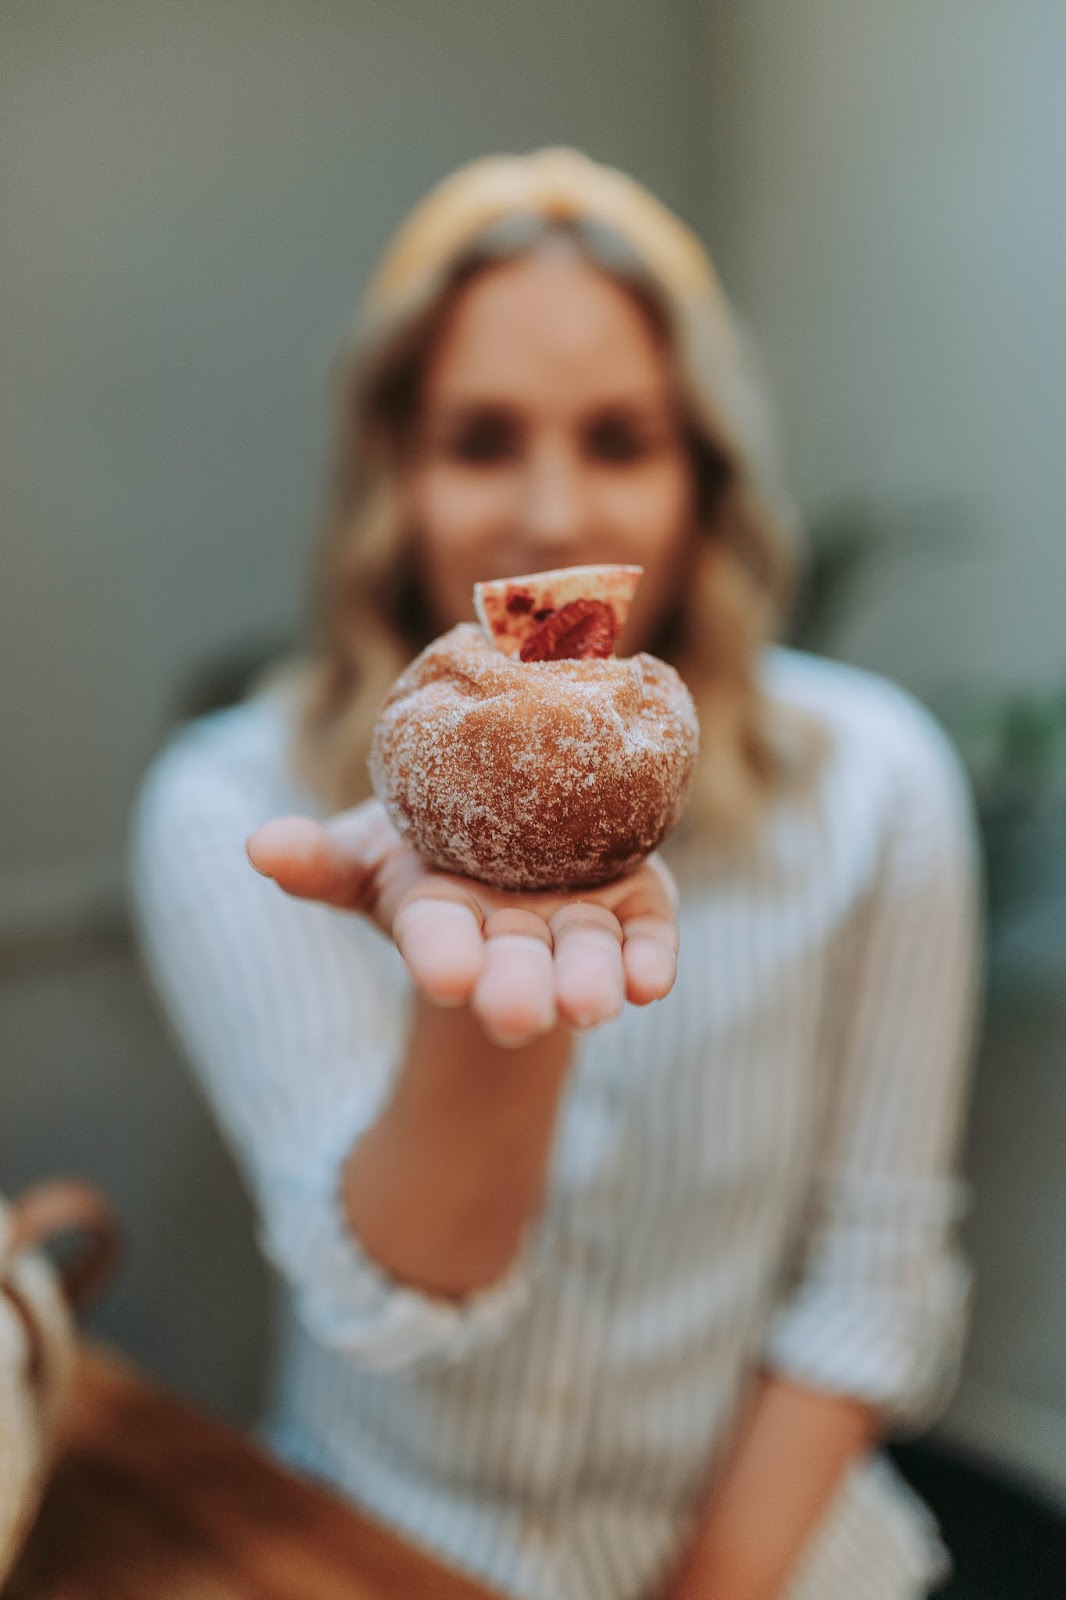 Wellbeing | Why I'm Done With Fad Diets and False Claims - Rachel Emily Blog